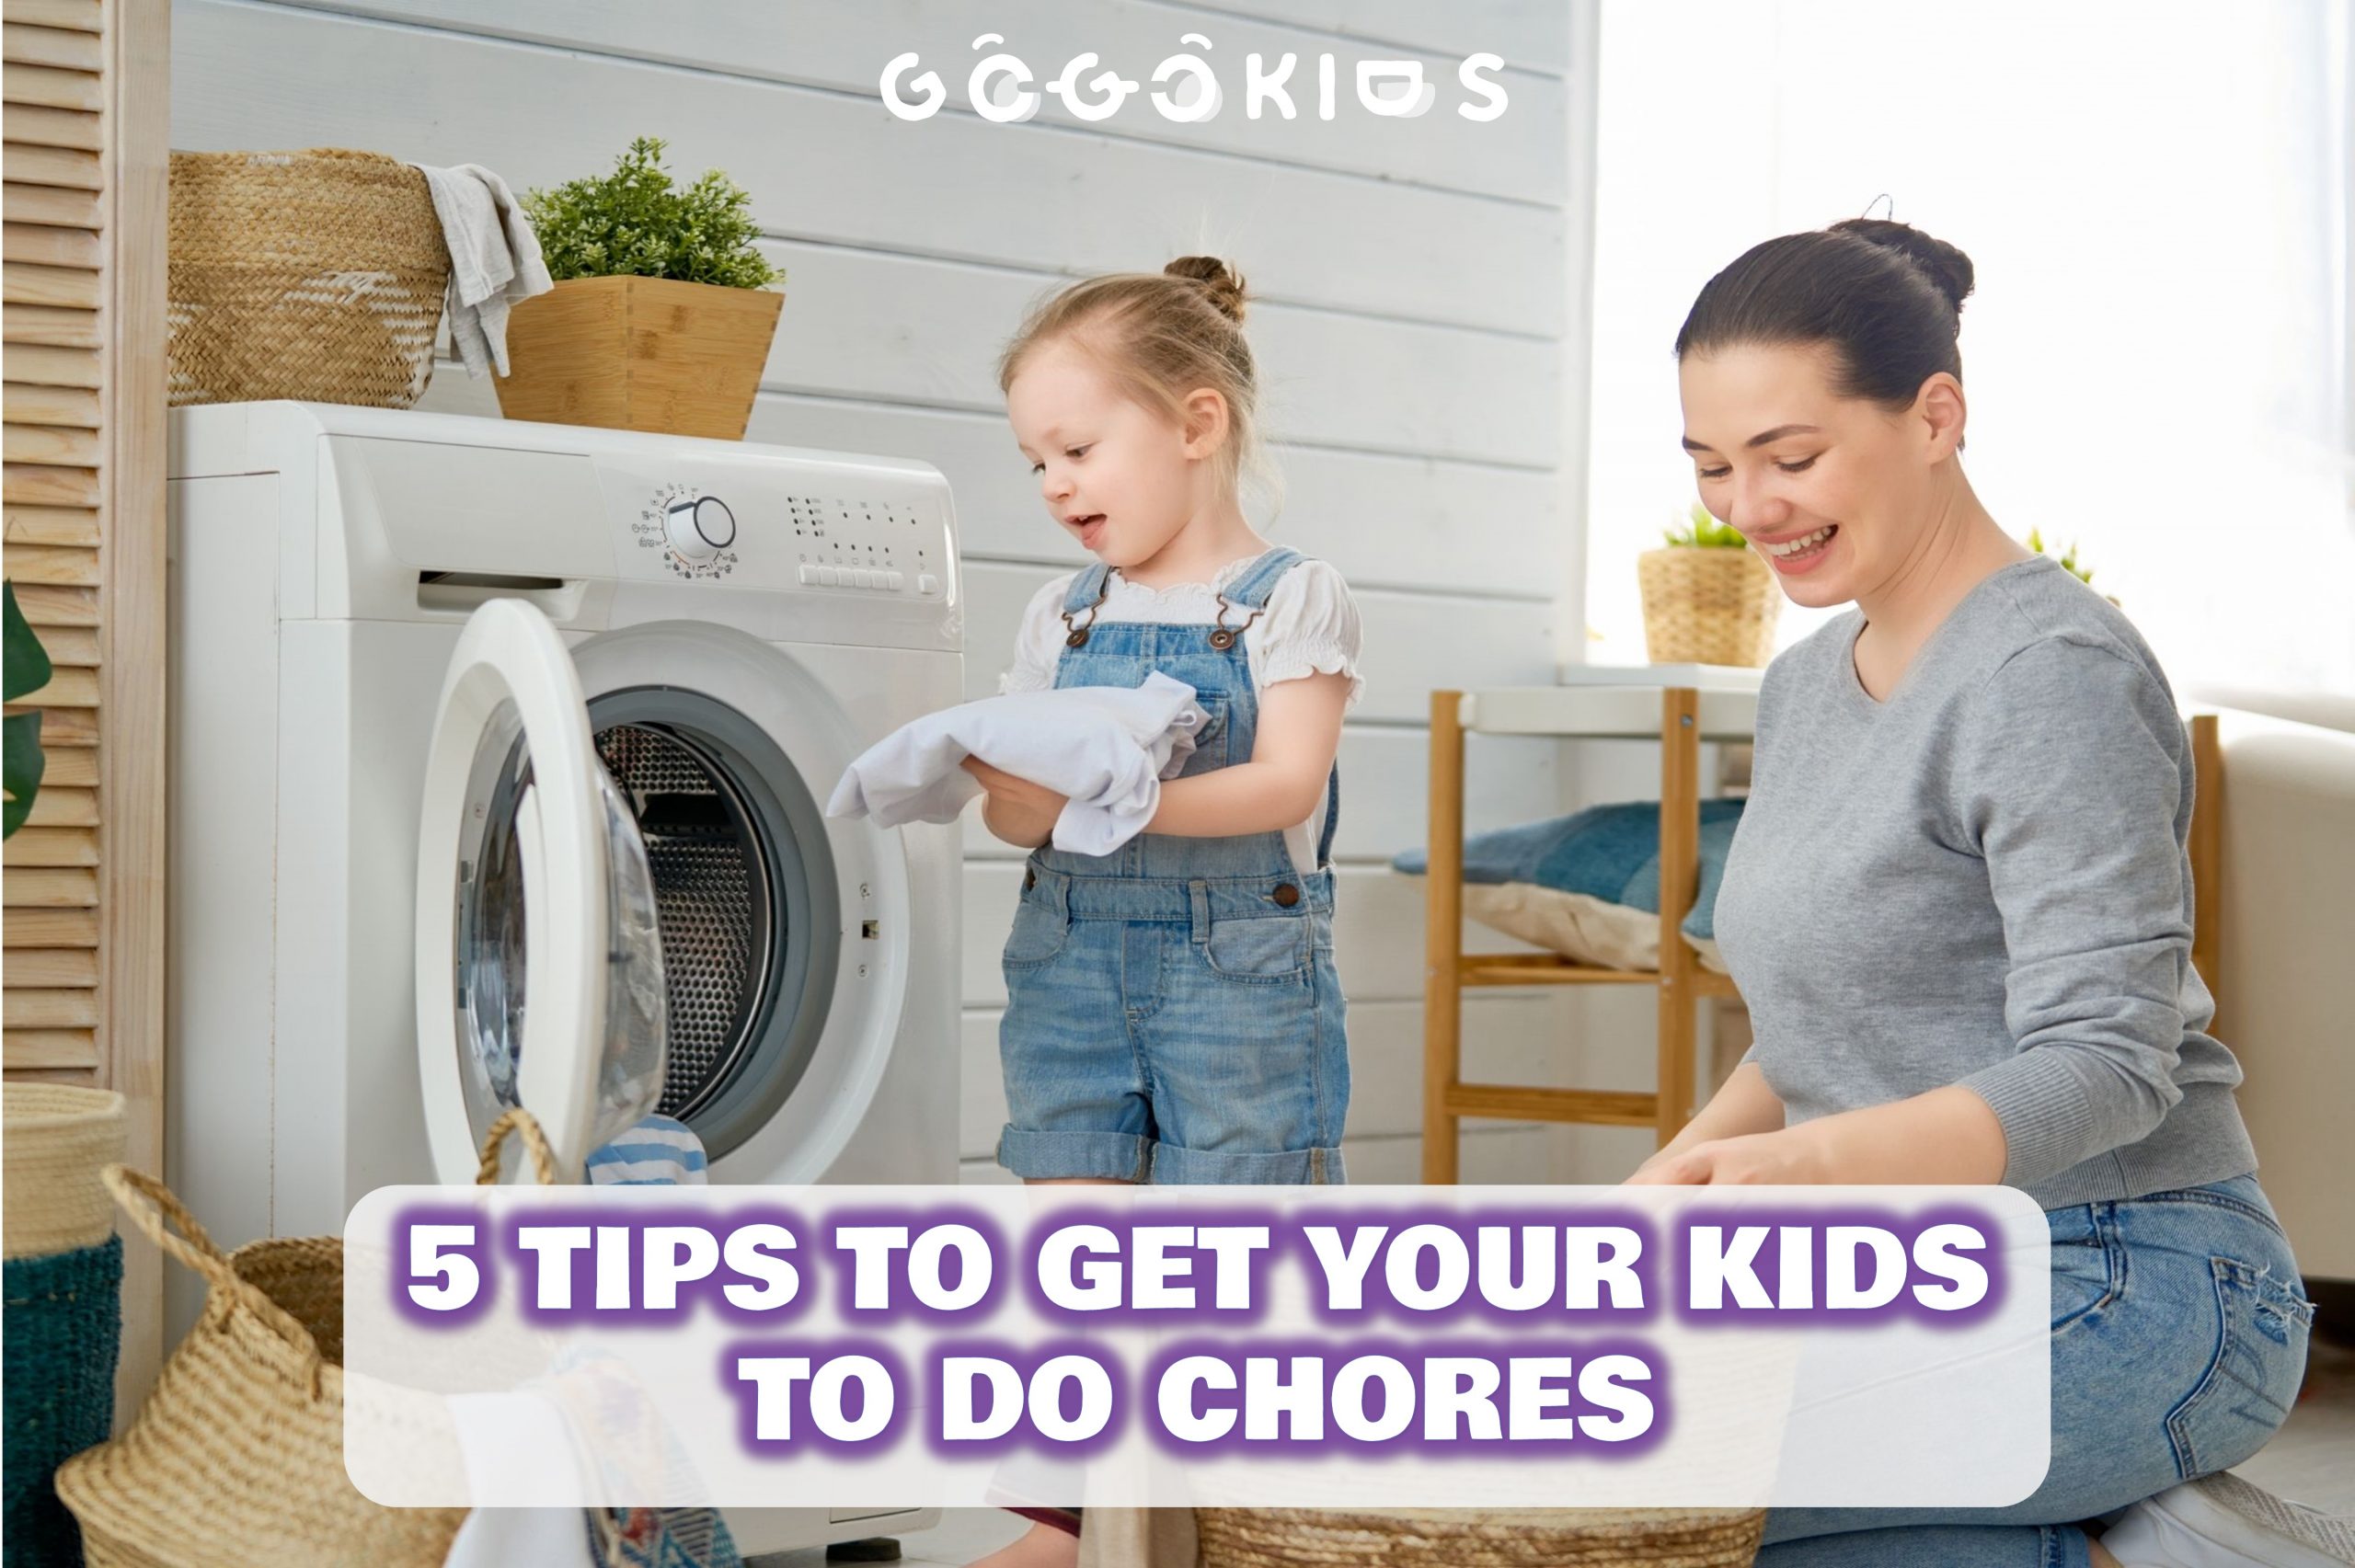 5 Tips to Get Your Kids to Do Chores